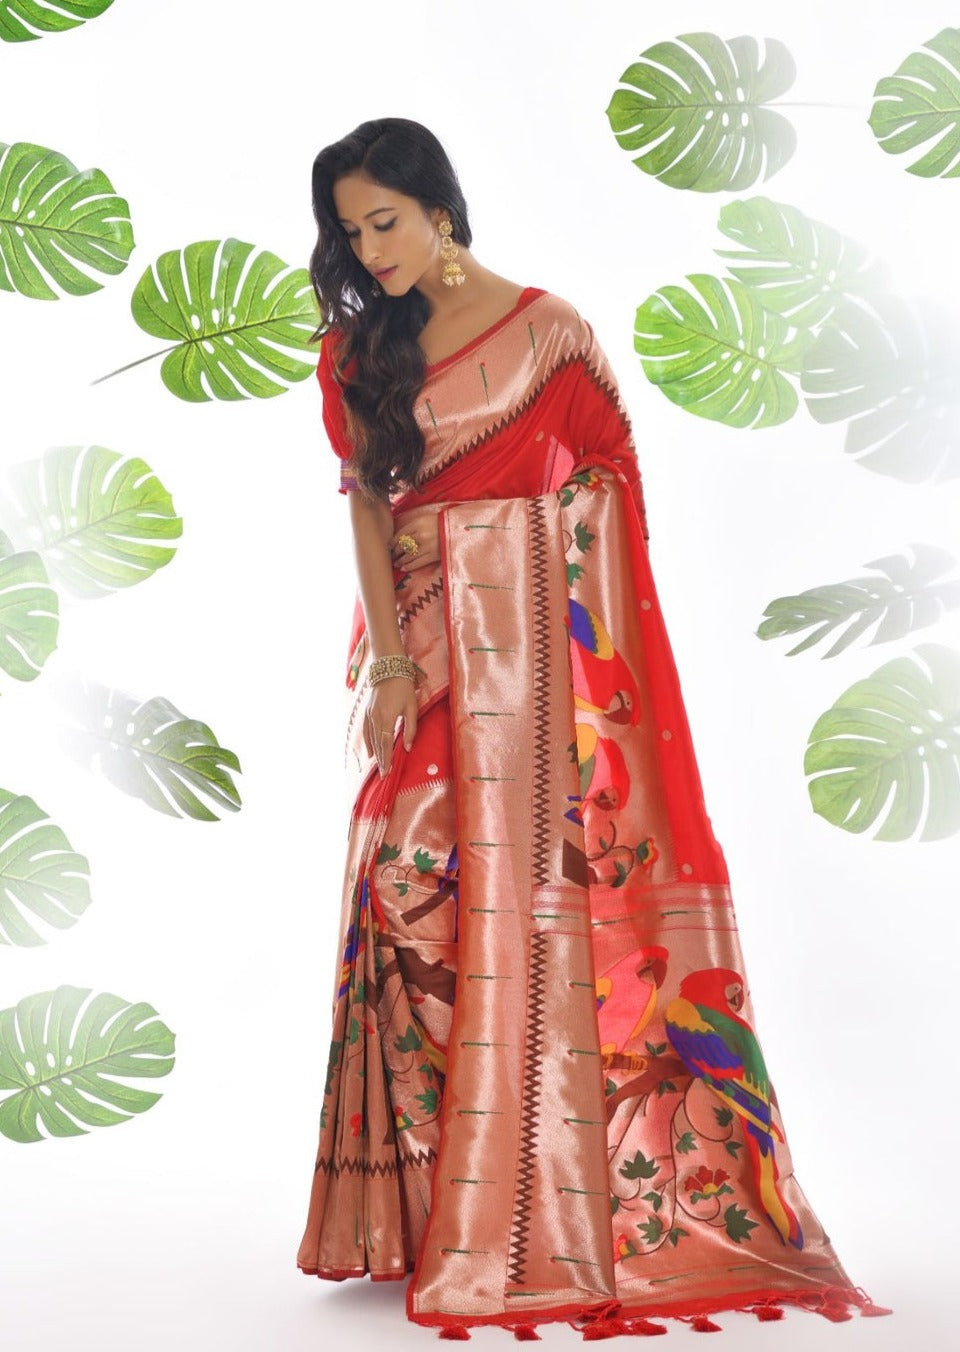 Women's Paithani saree in red colour